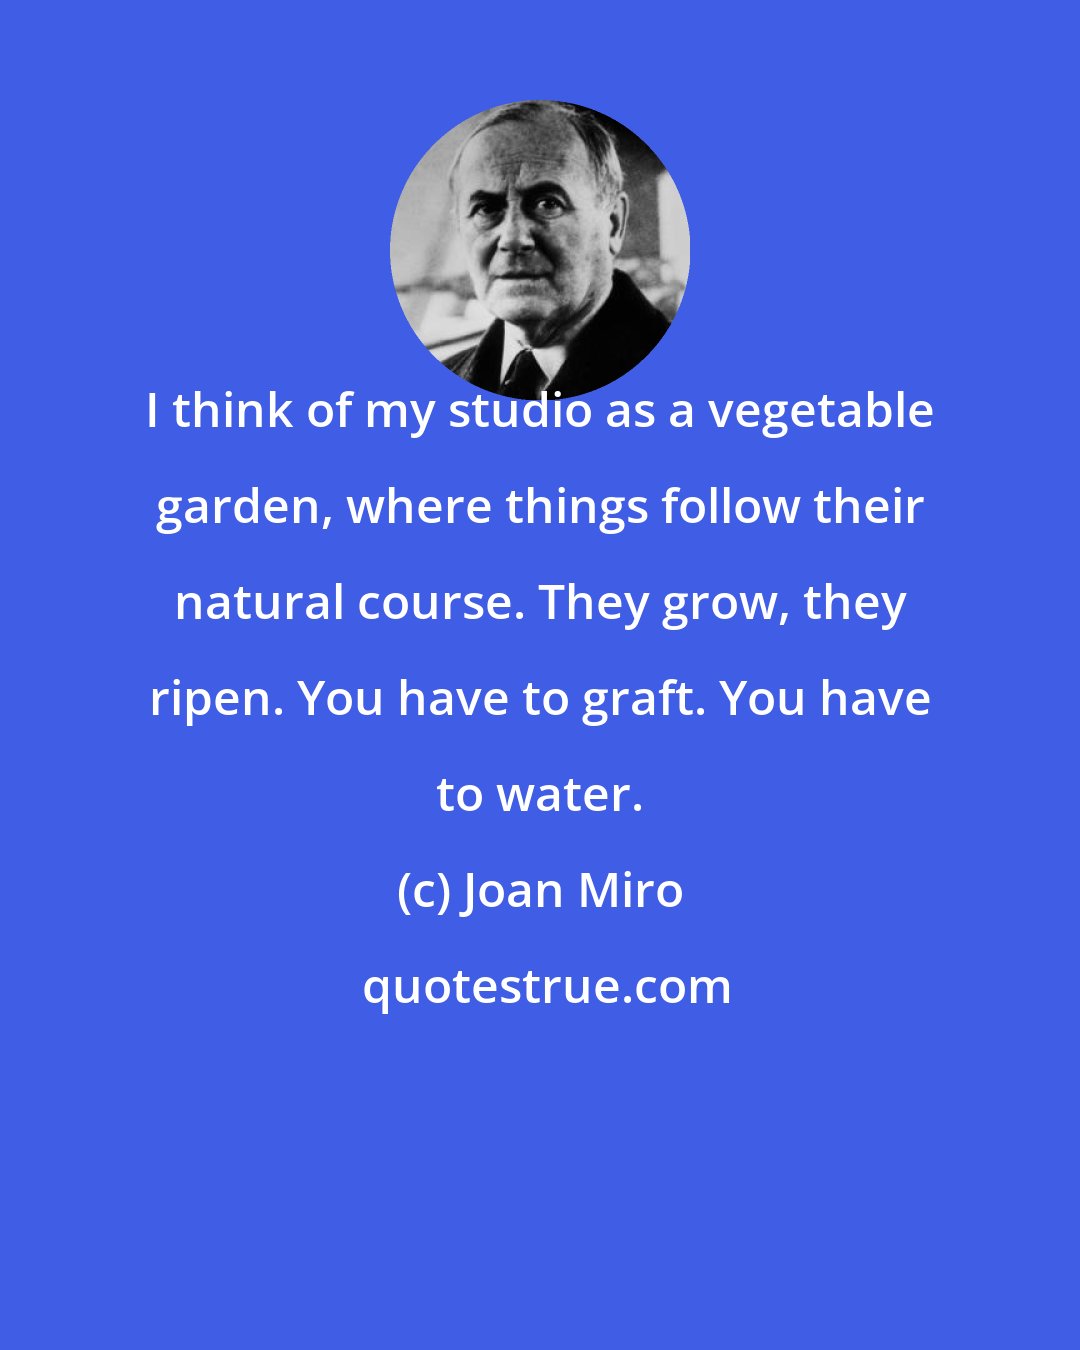 Joan Miro: I think of my studio as a vegetable garden, where things follow their natural course. They grow, they ripen. You have to graft. You have to water.